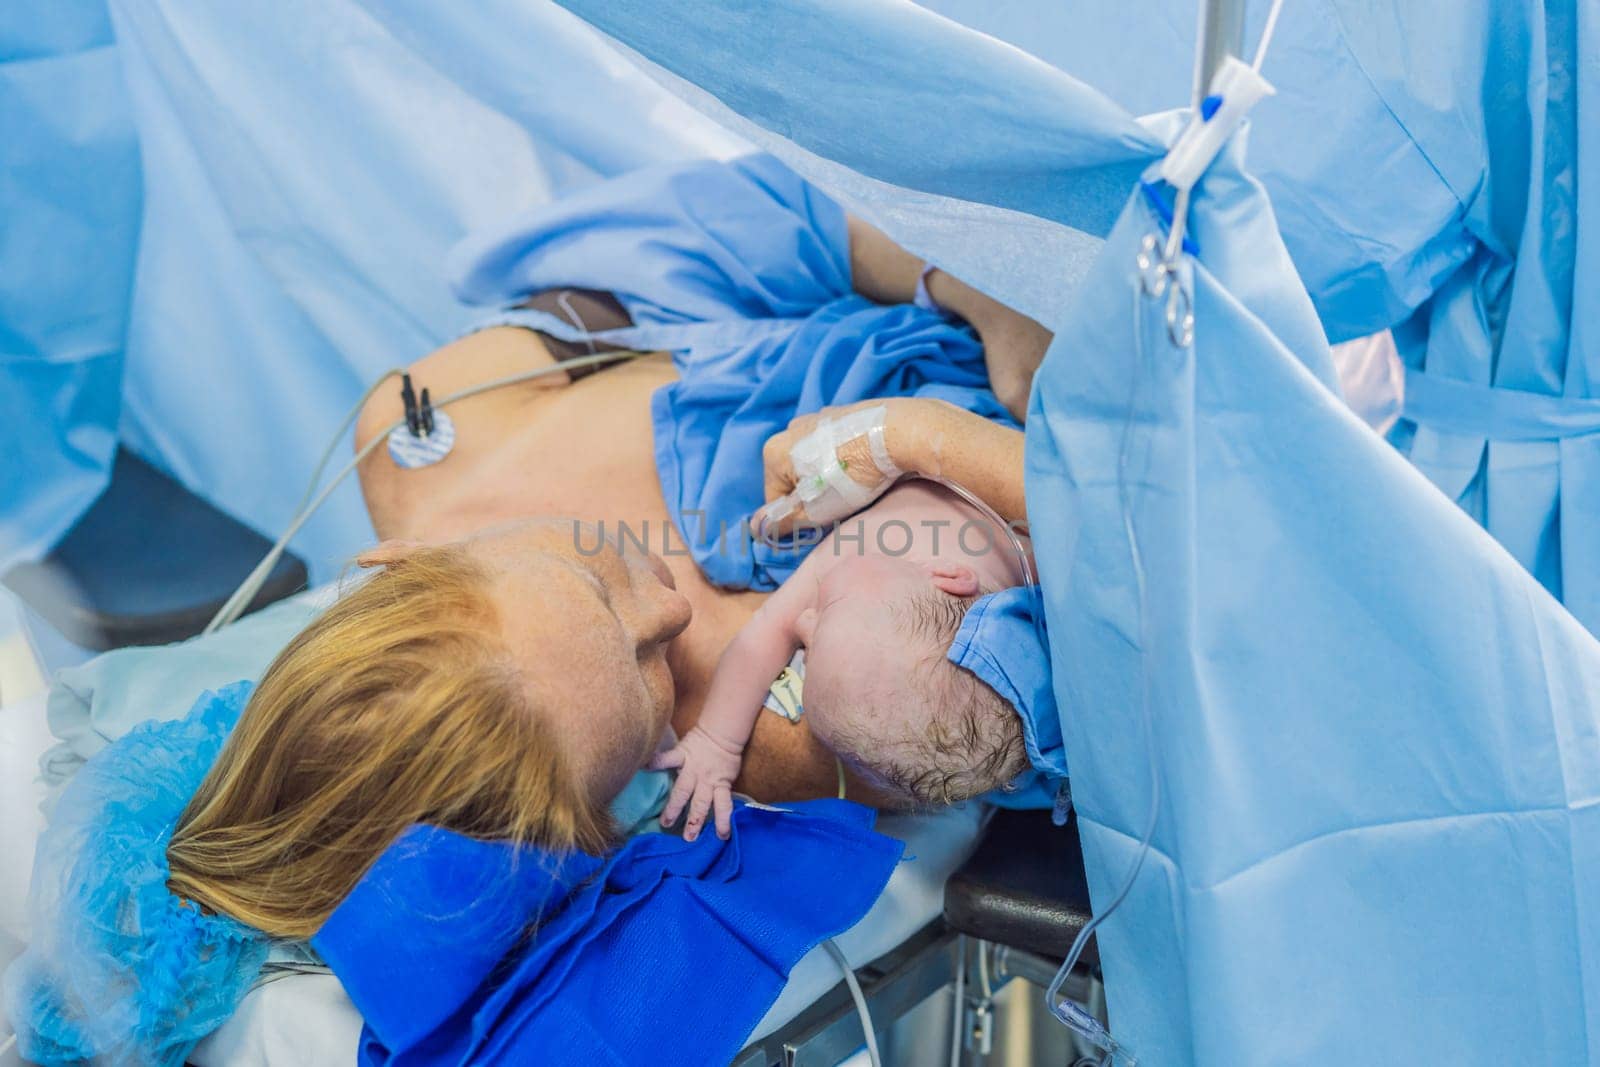 Baby on mother's chest immediately after birth in a hospital. The mother and newborn share a tender moment, emphasizing the bond and emotional connection. The medical staff ensures a safe and caring environment by galitskaya